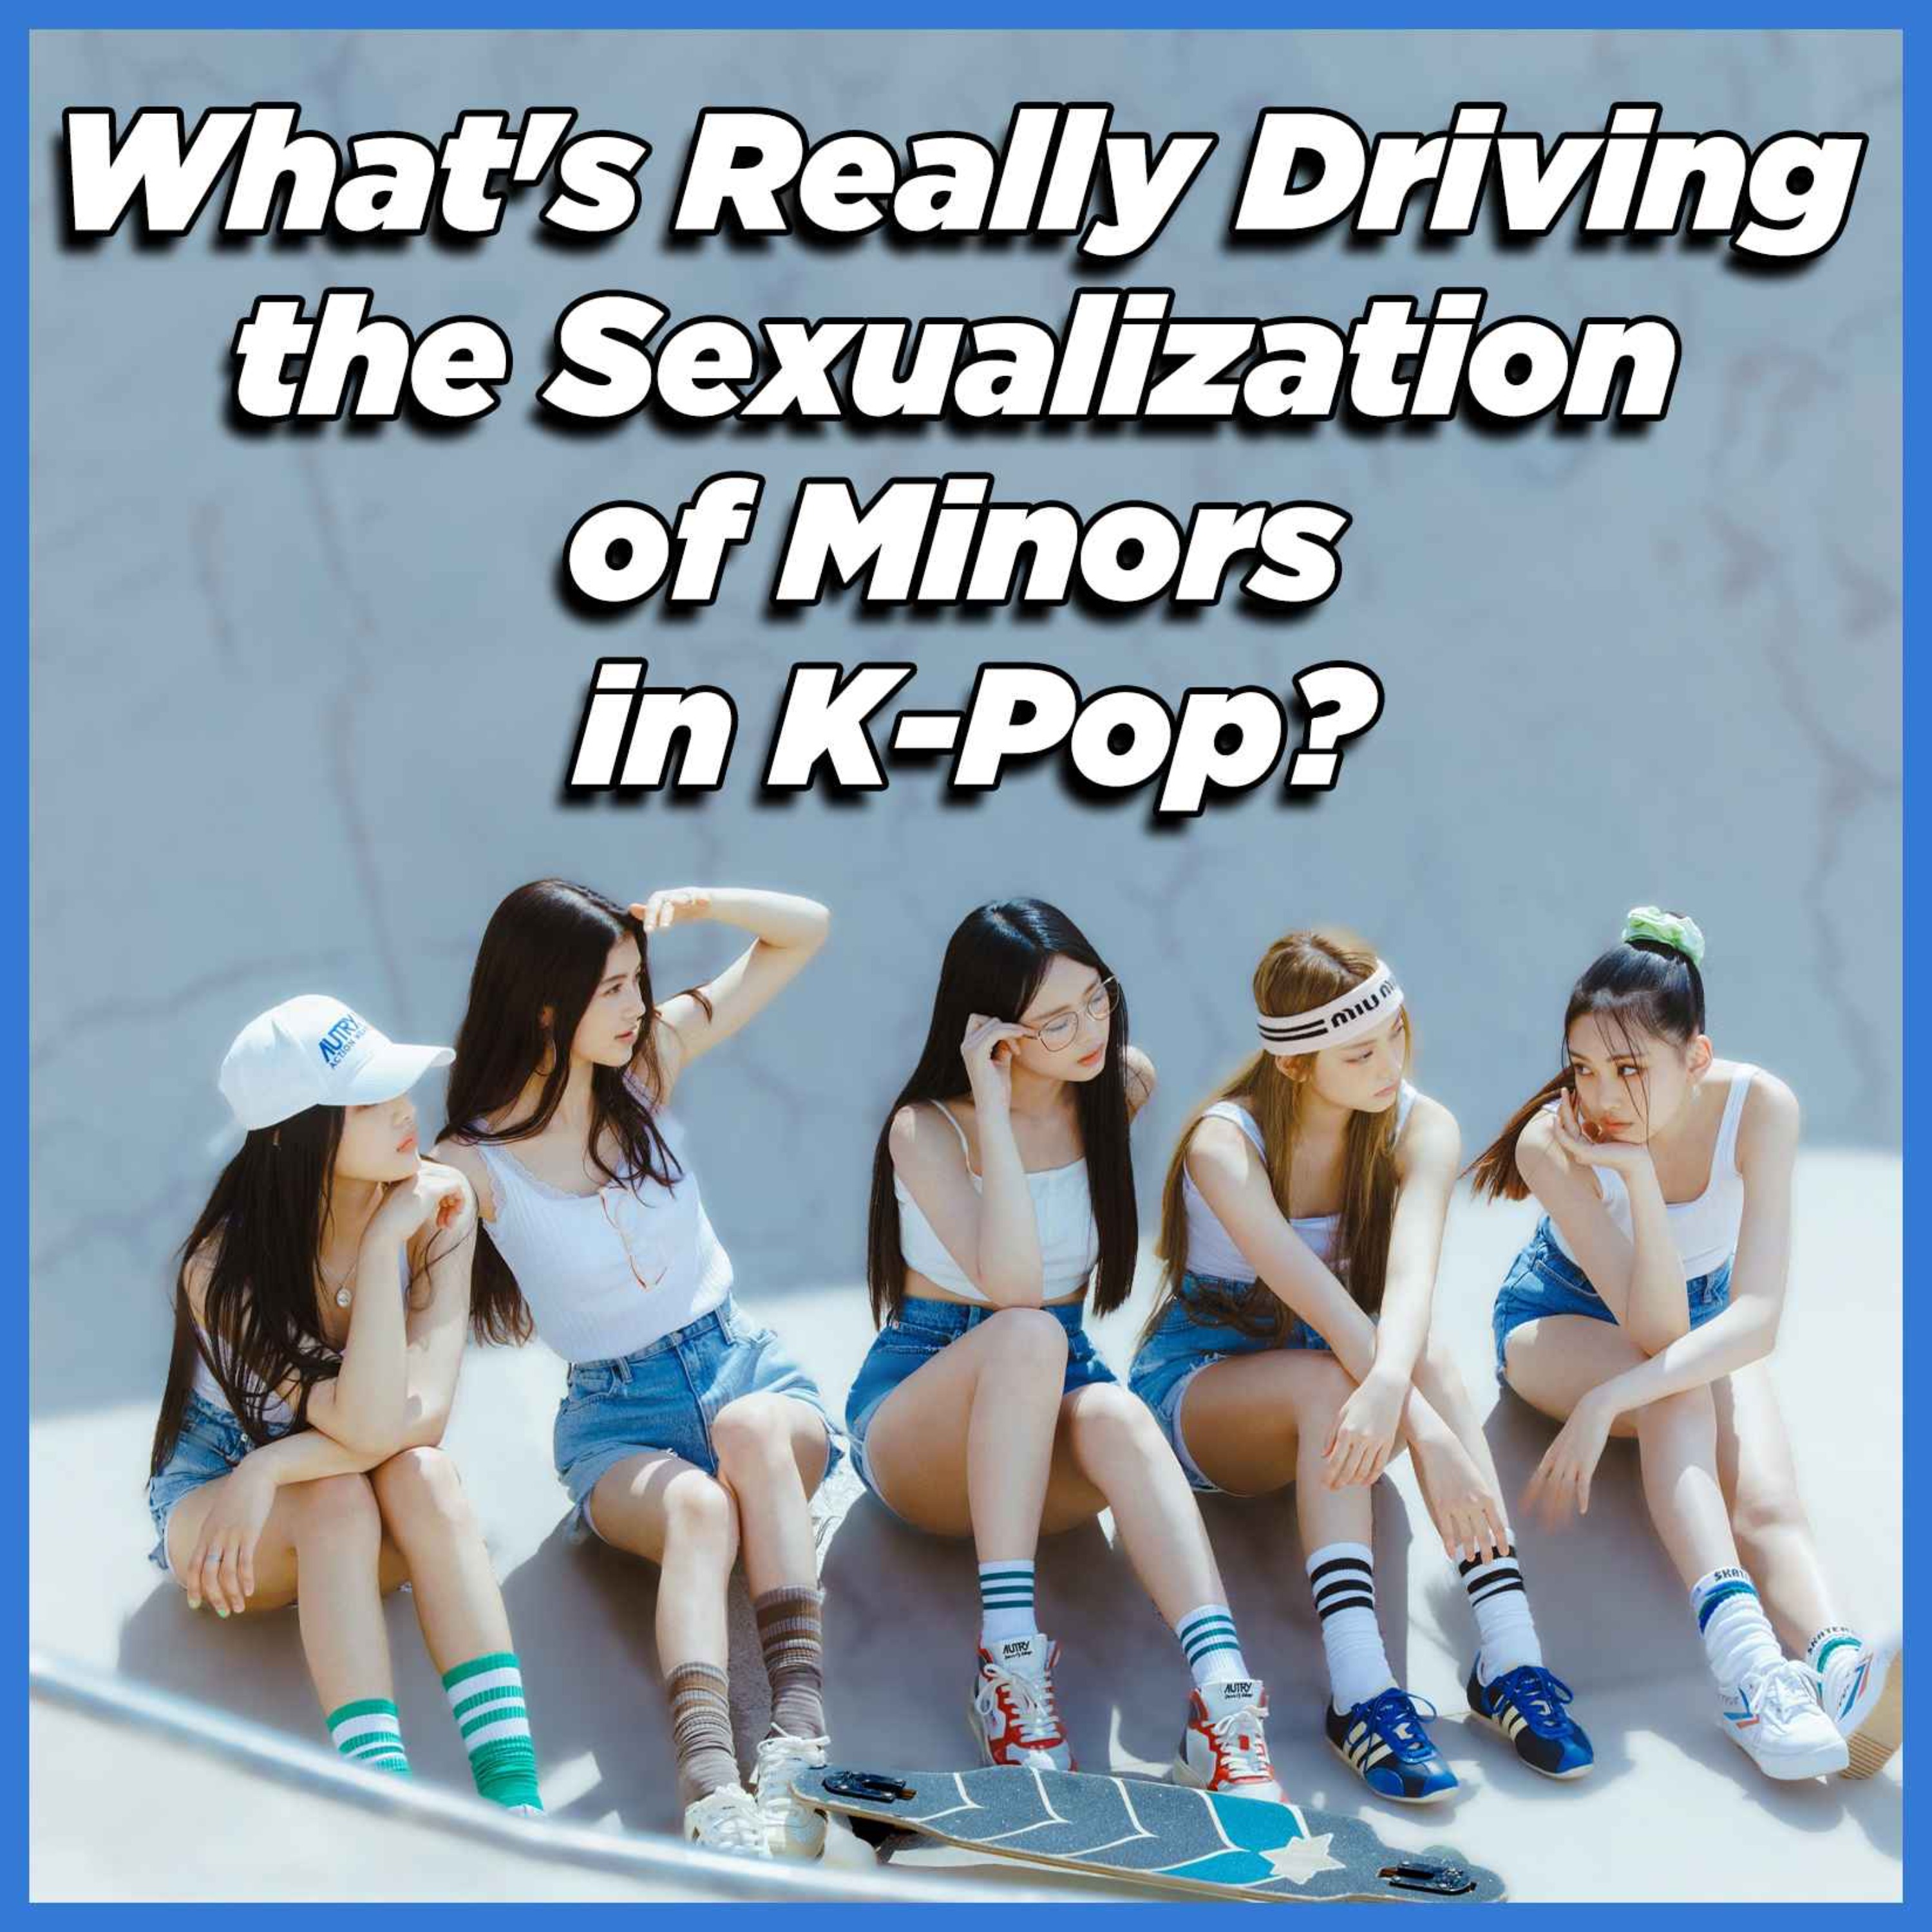 What’s Really Driving the Sexualization of Minors in K-Pop?